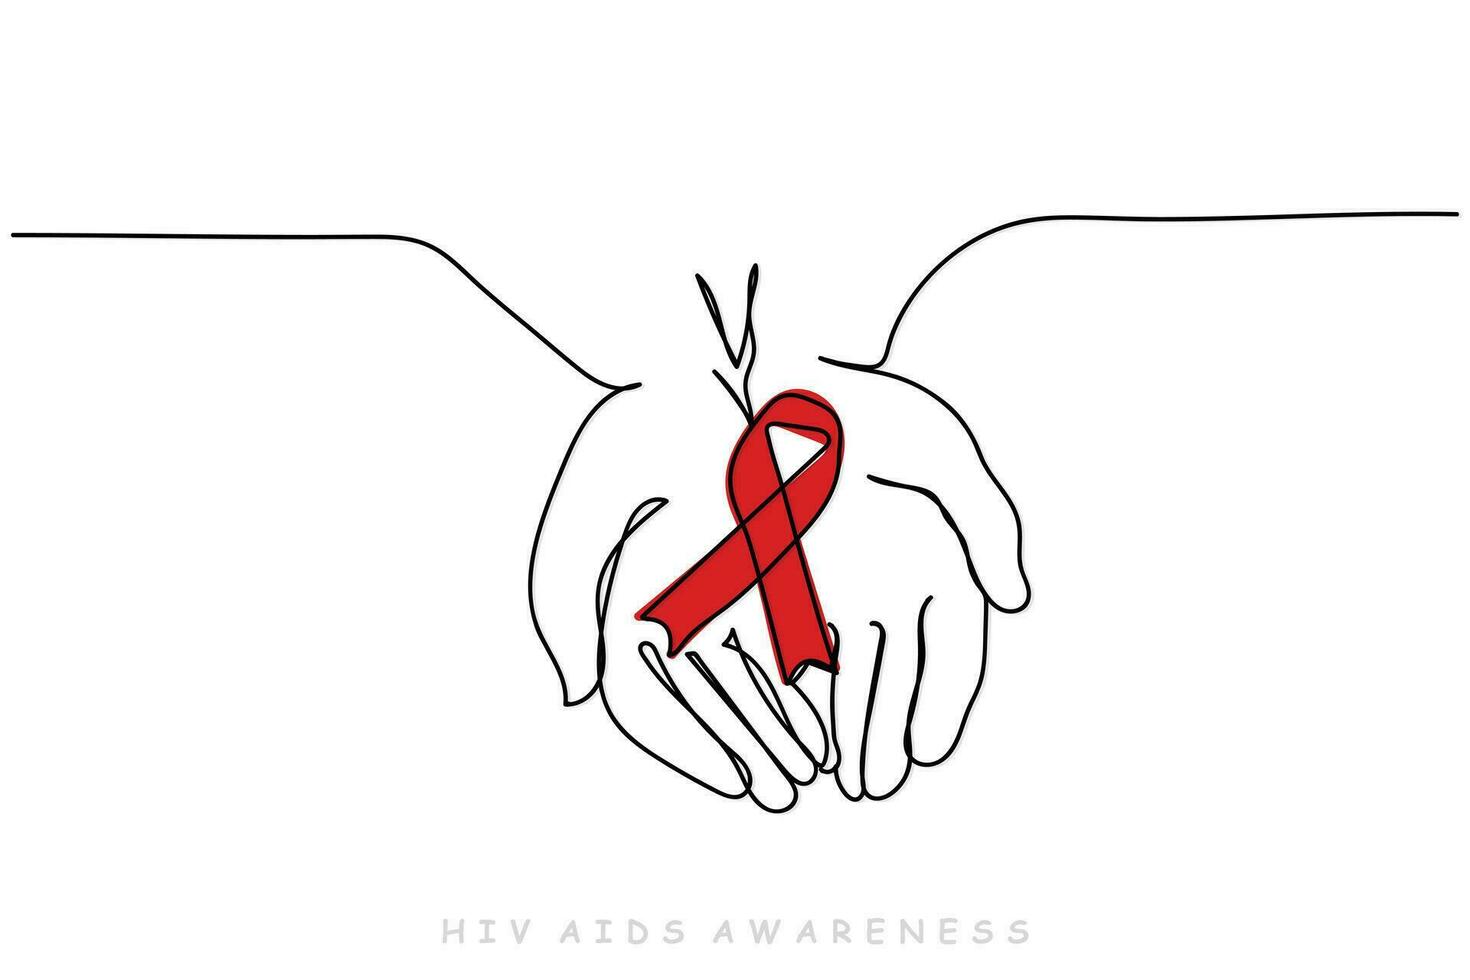 Aids Awareness Red Ribbon. World AIDS Day Concept vector